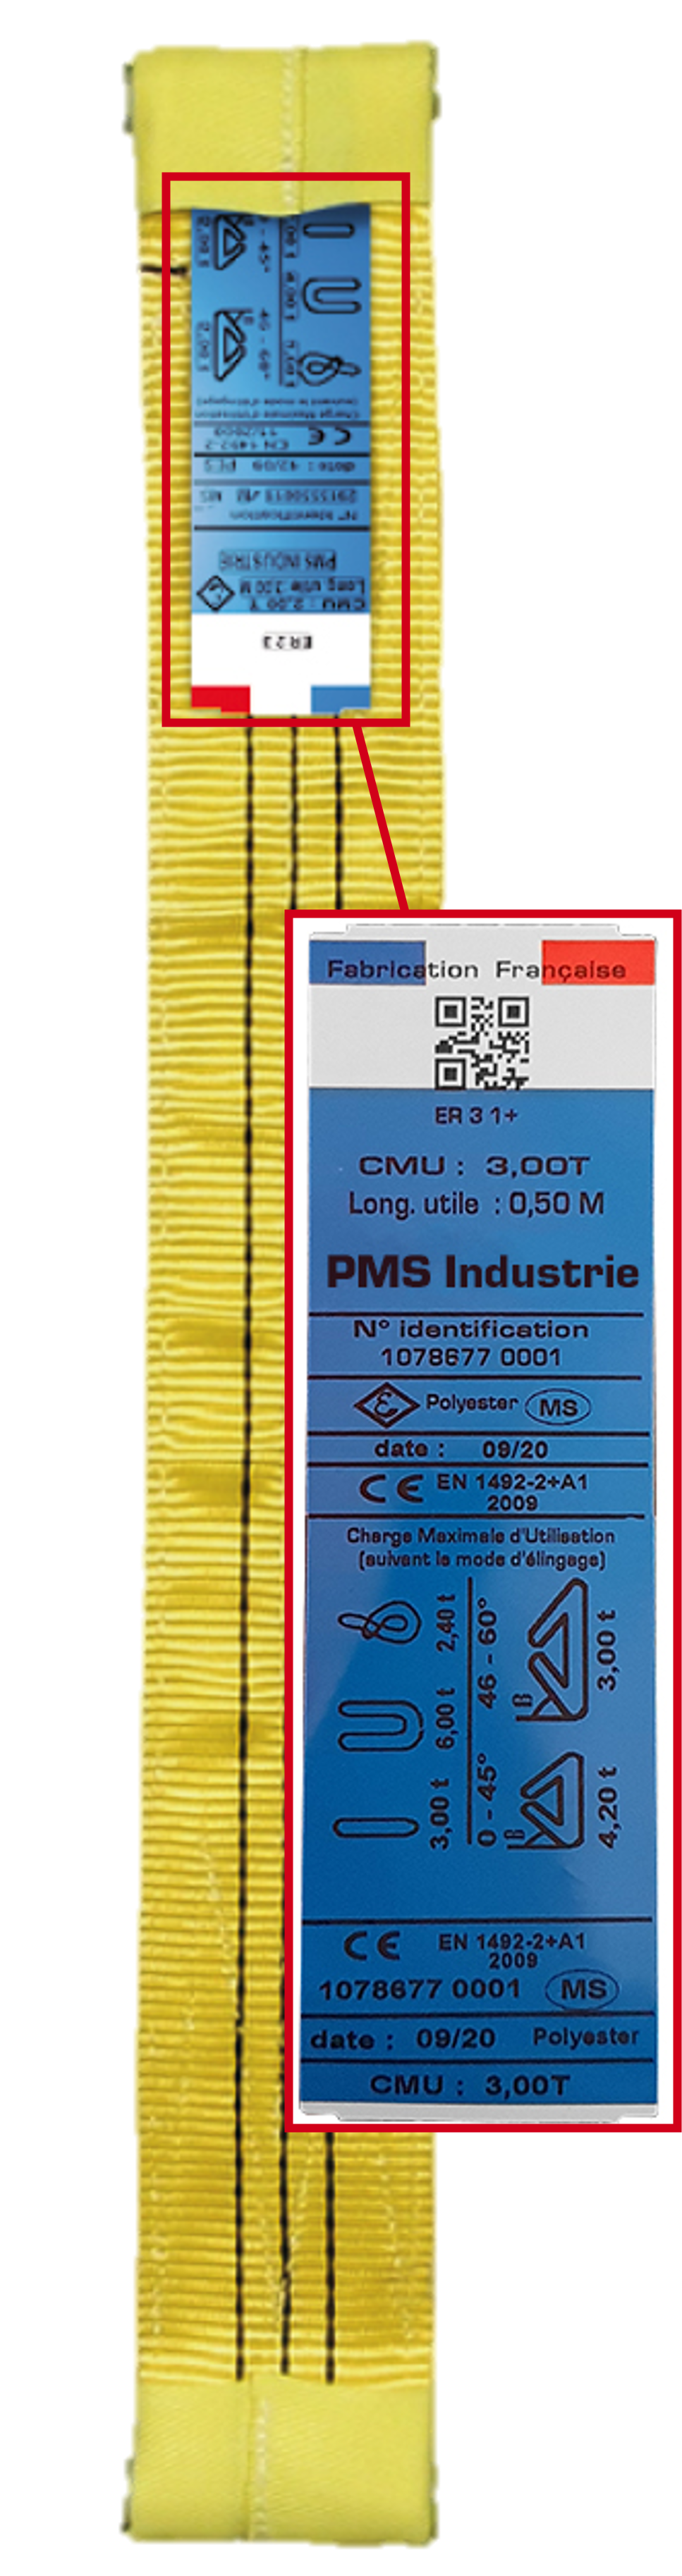 PMS products safety